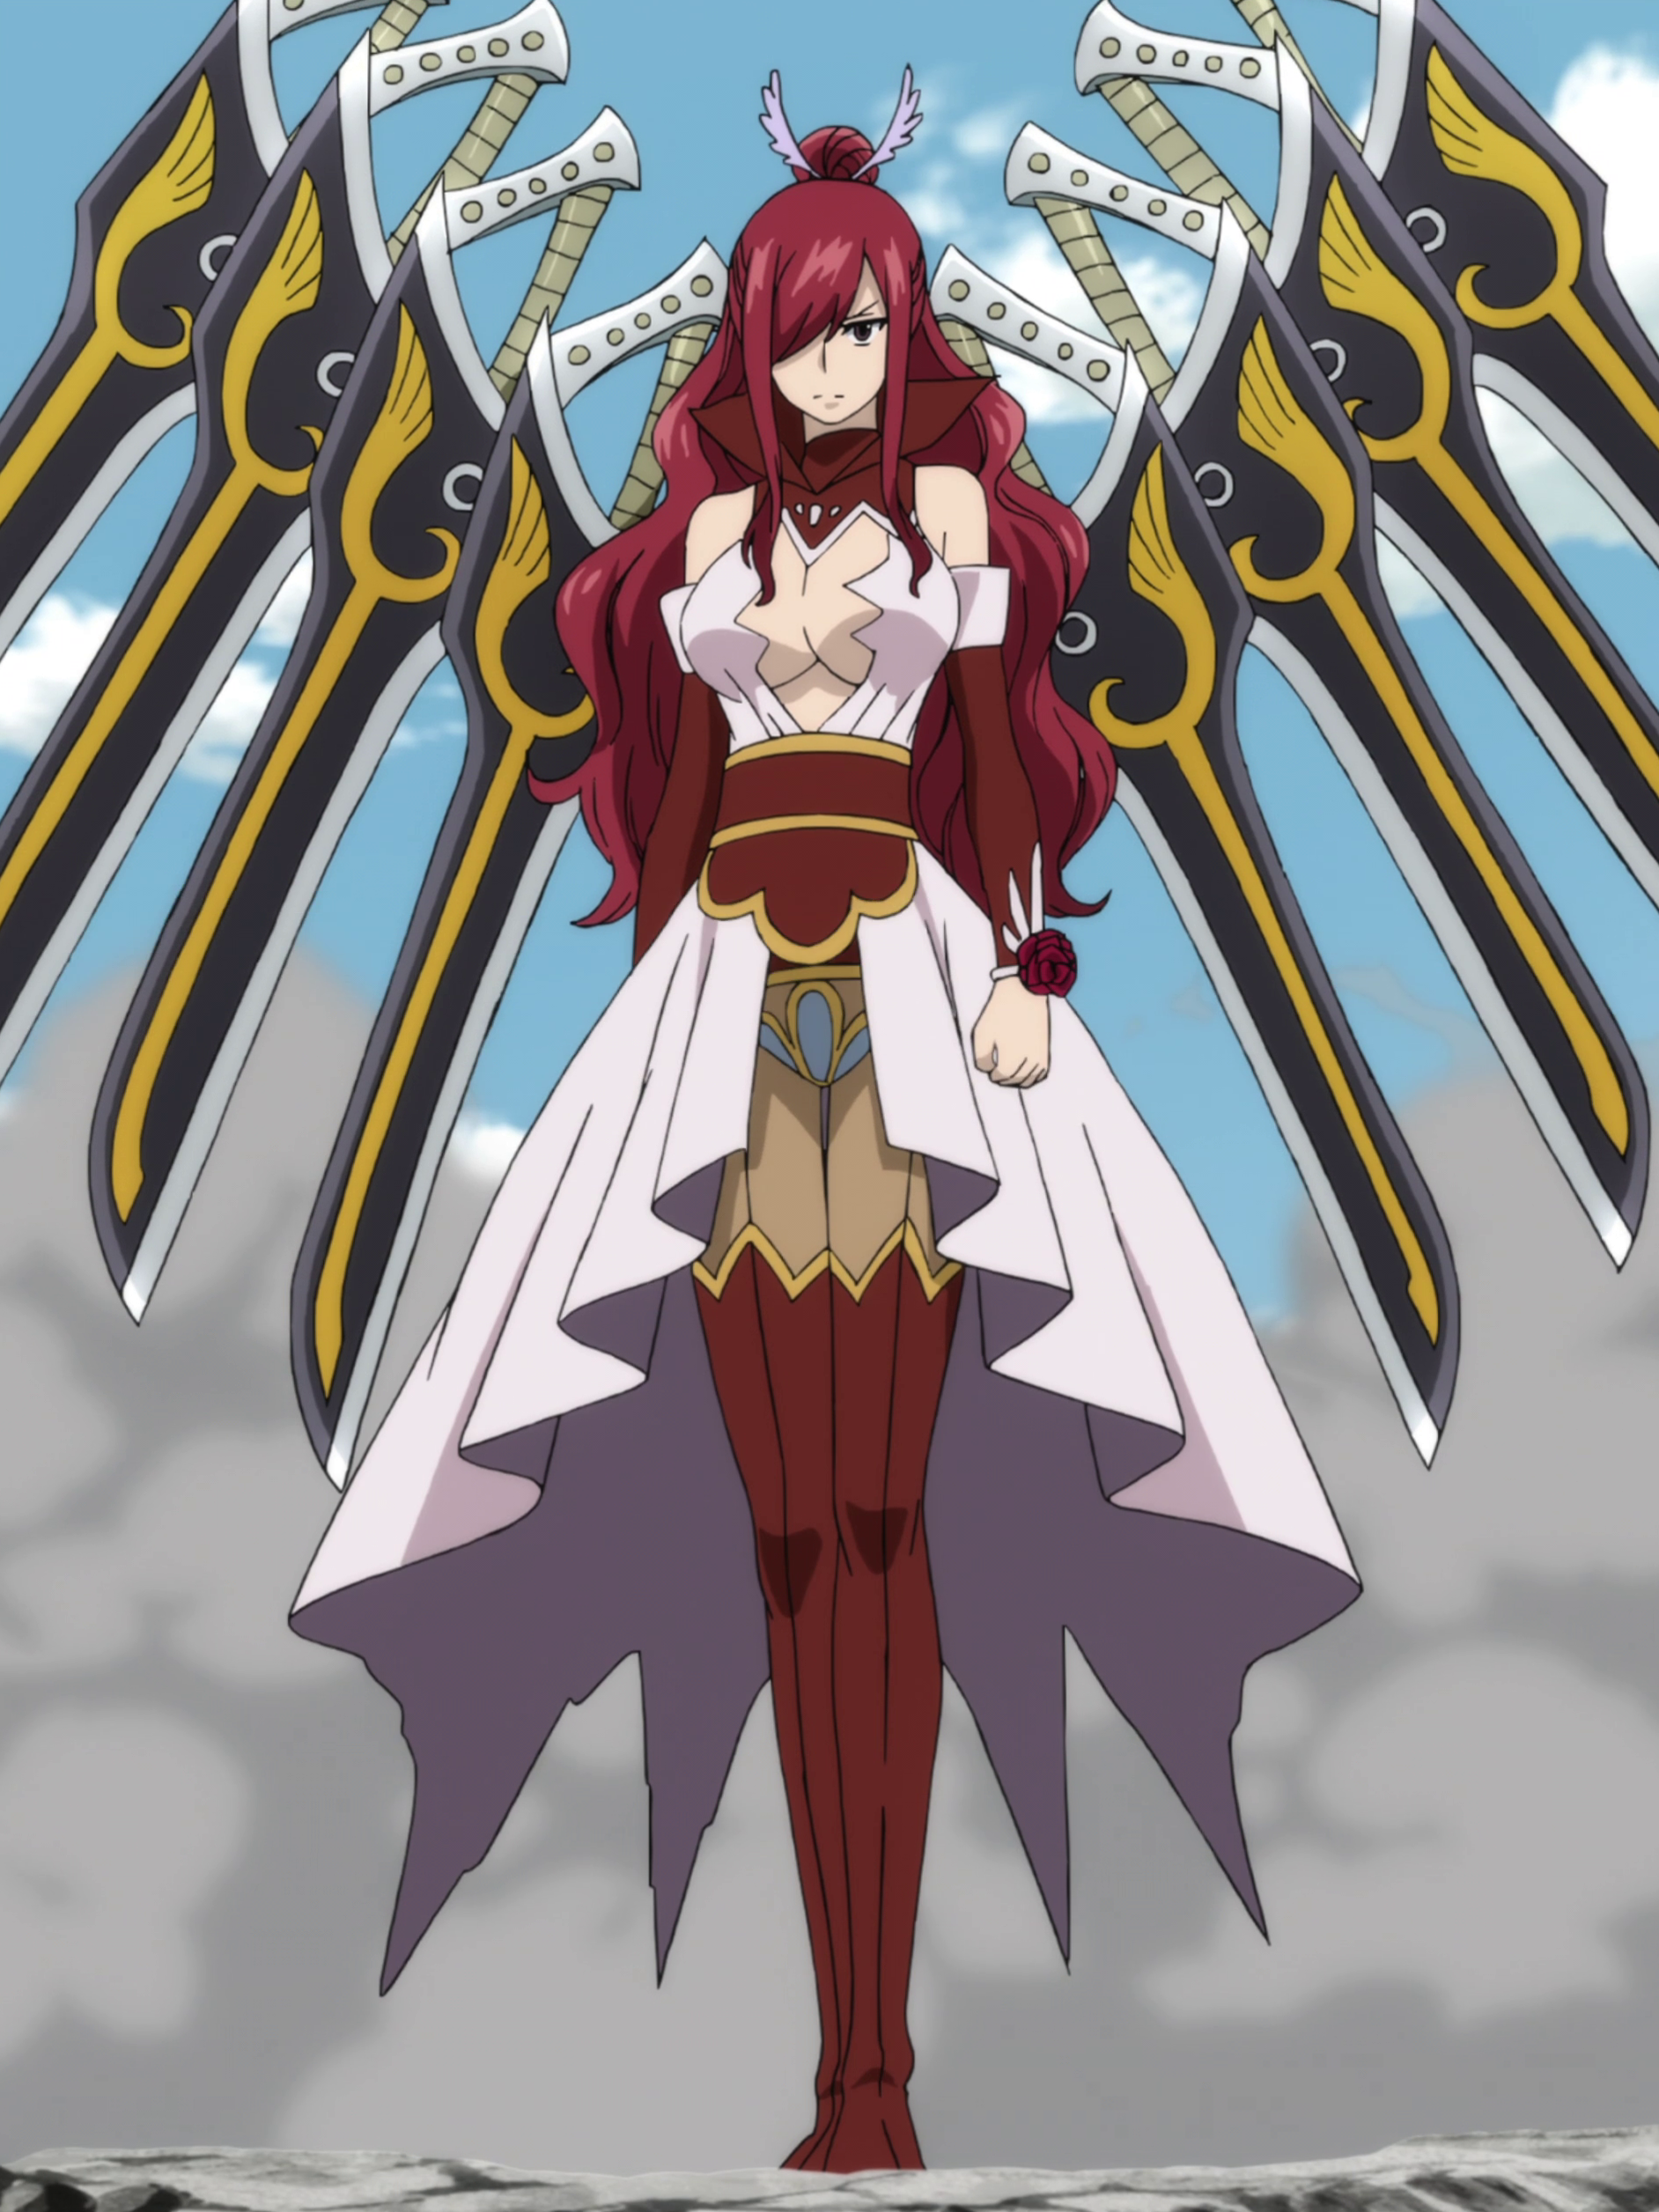 Erza Fairy Tale Characters Anime - Free Transparent PNG Download - PNGkey